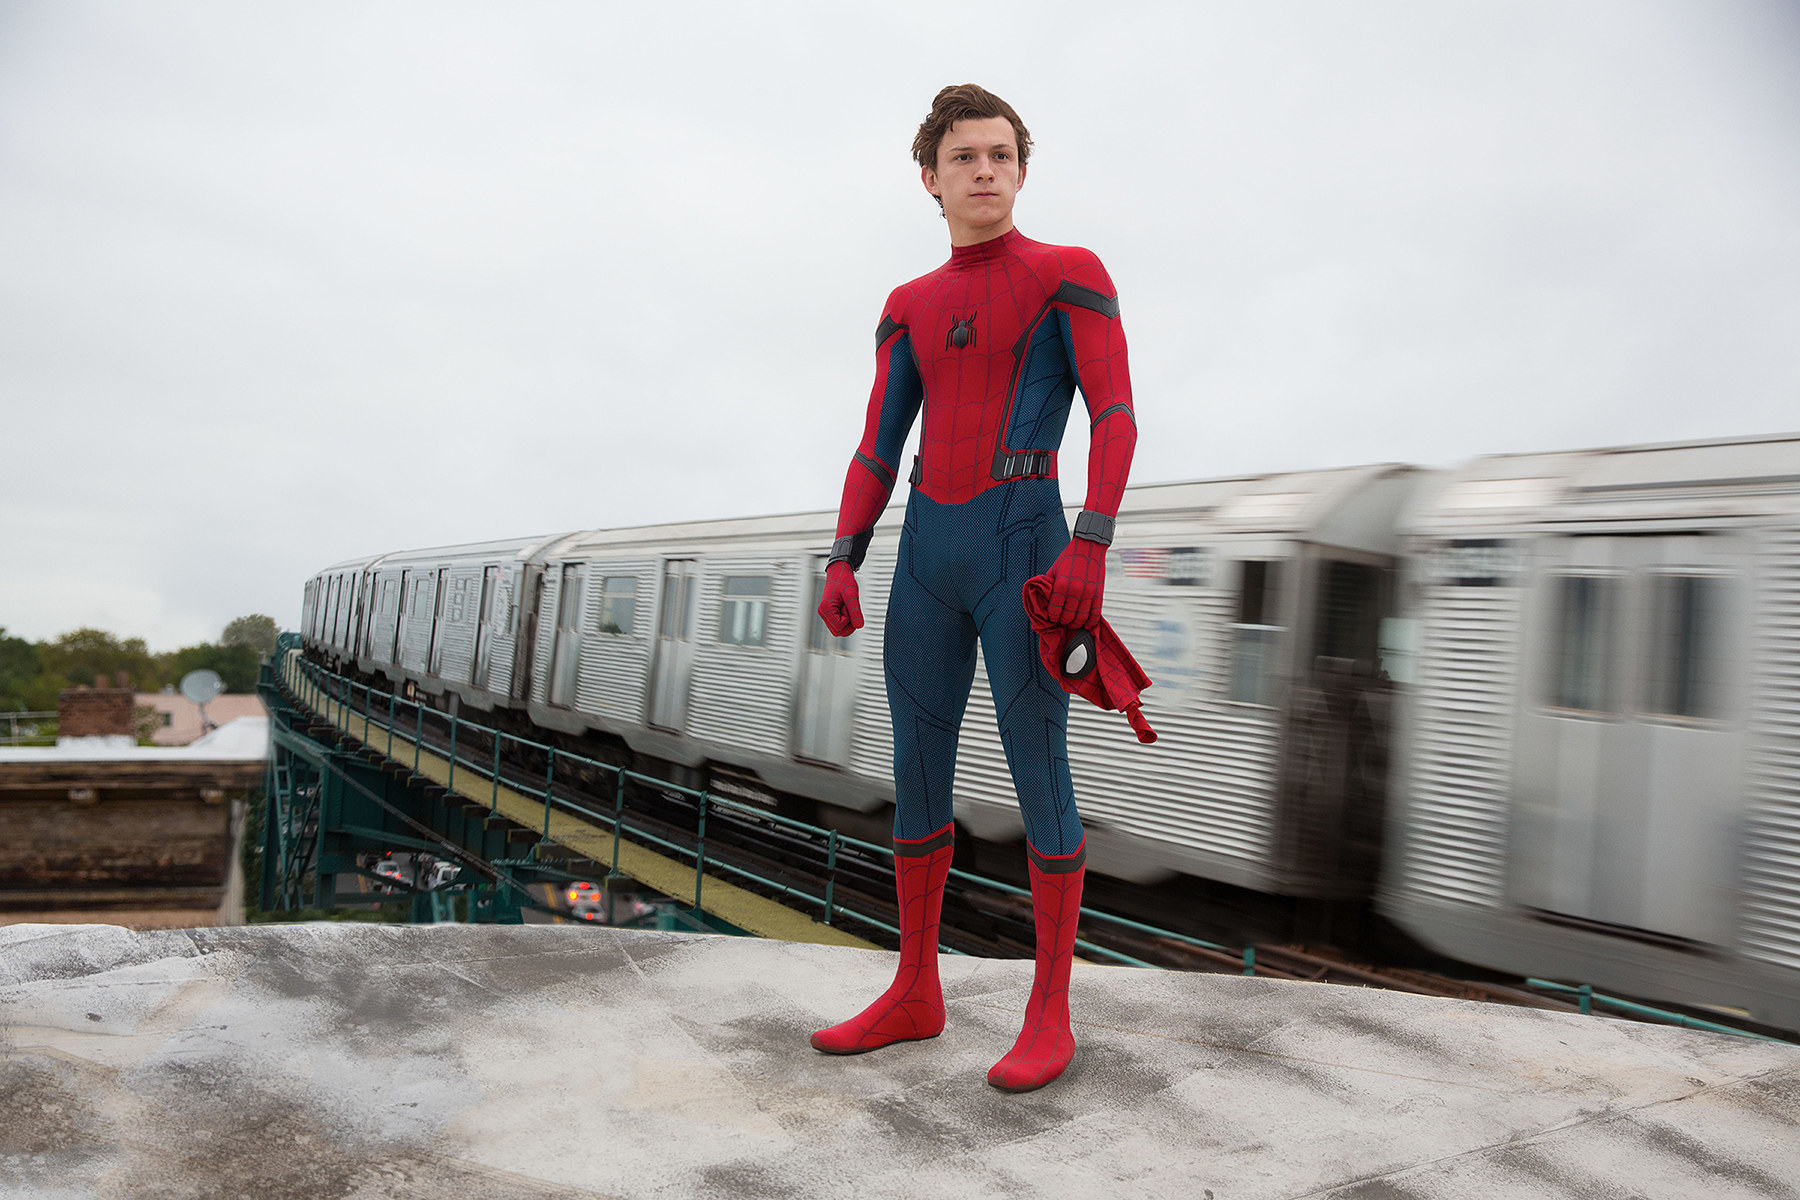 Peter wearing his classic Spider-Man suit